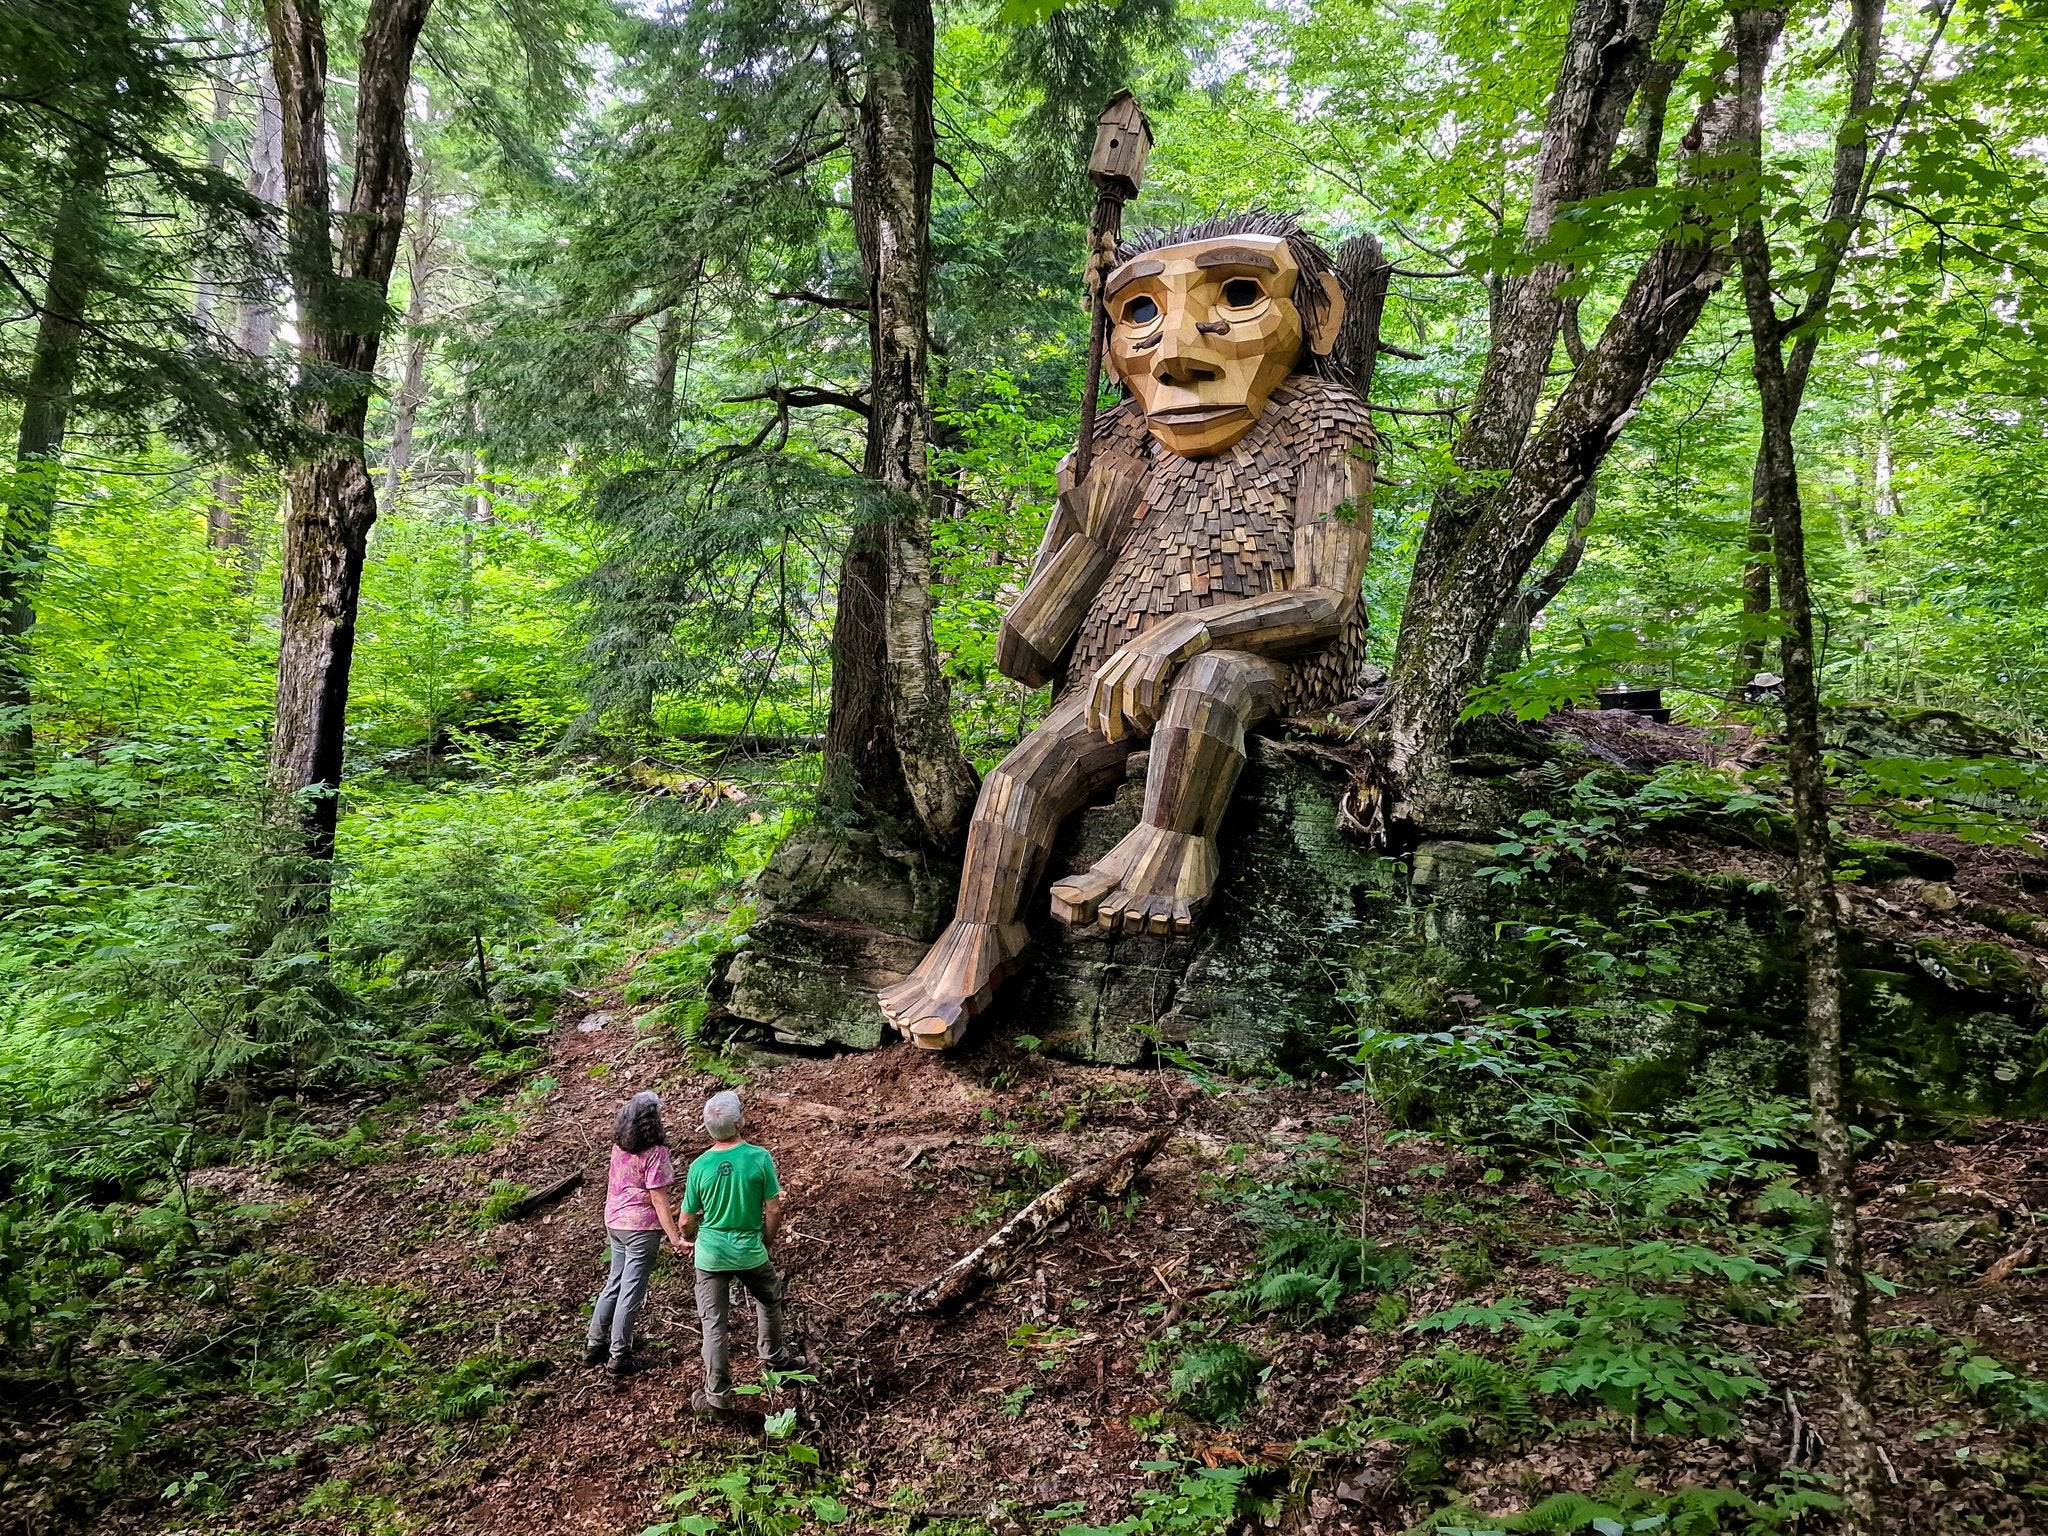 A giant wooden troll sculpture by Danish artist Thomas Dambo sits on a rock in a Vermont wooded area, while two people look at it.